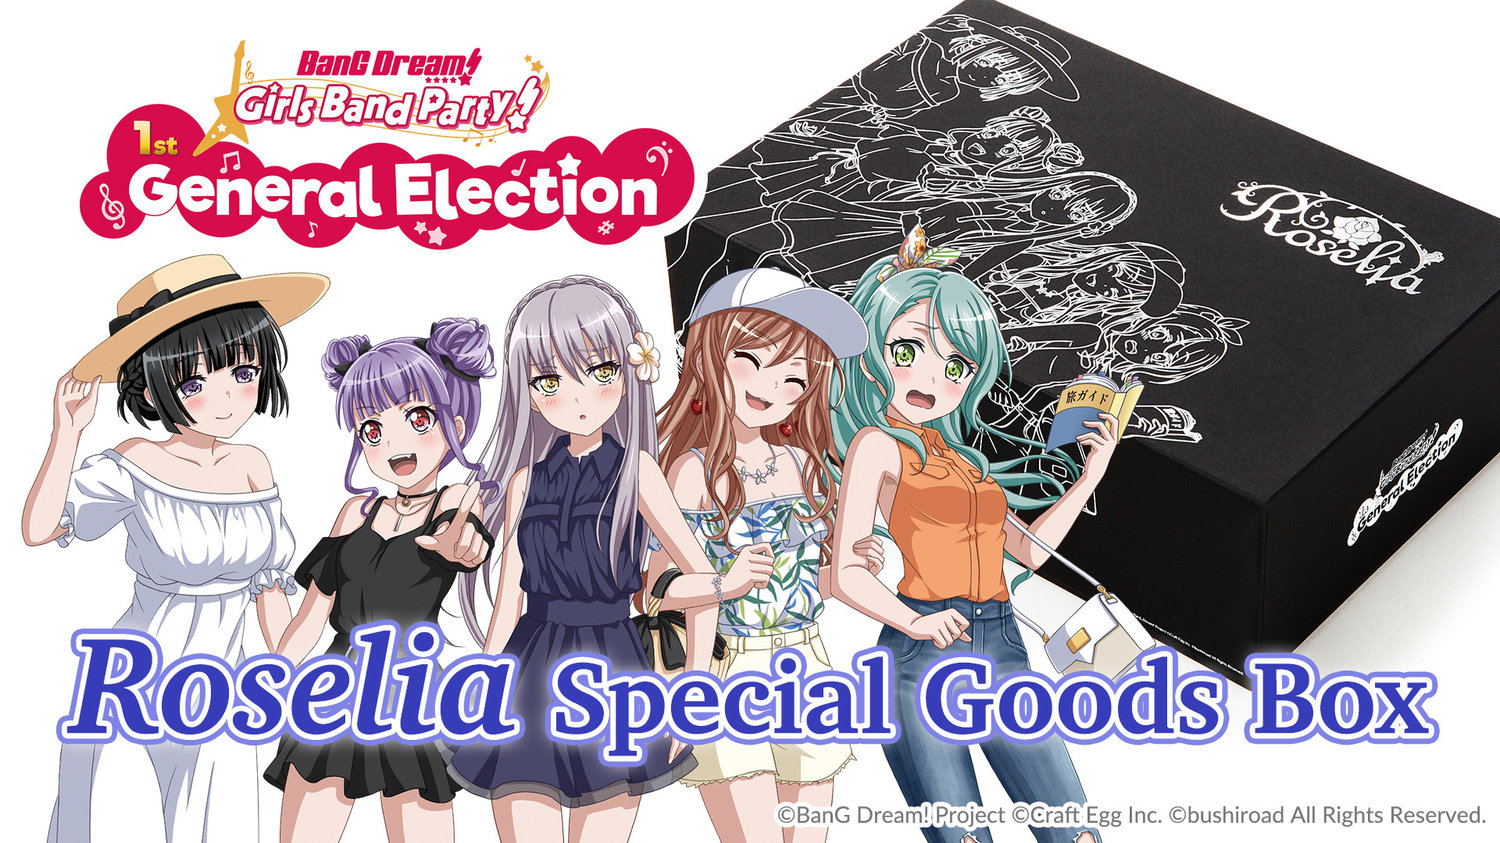 Roselia Special Goods Box to Celebrate Roselia winning the English Version of BanG Dream! Girls Band Party! 1st General Election!